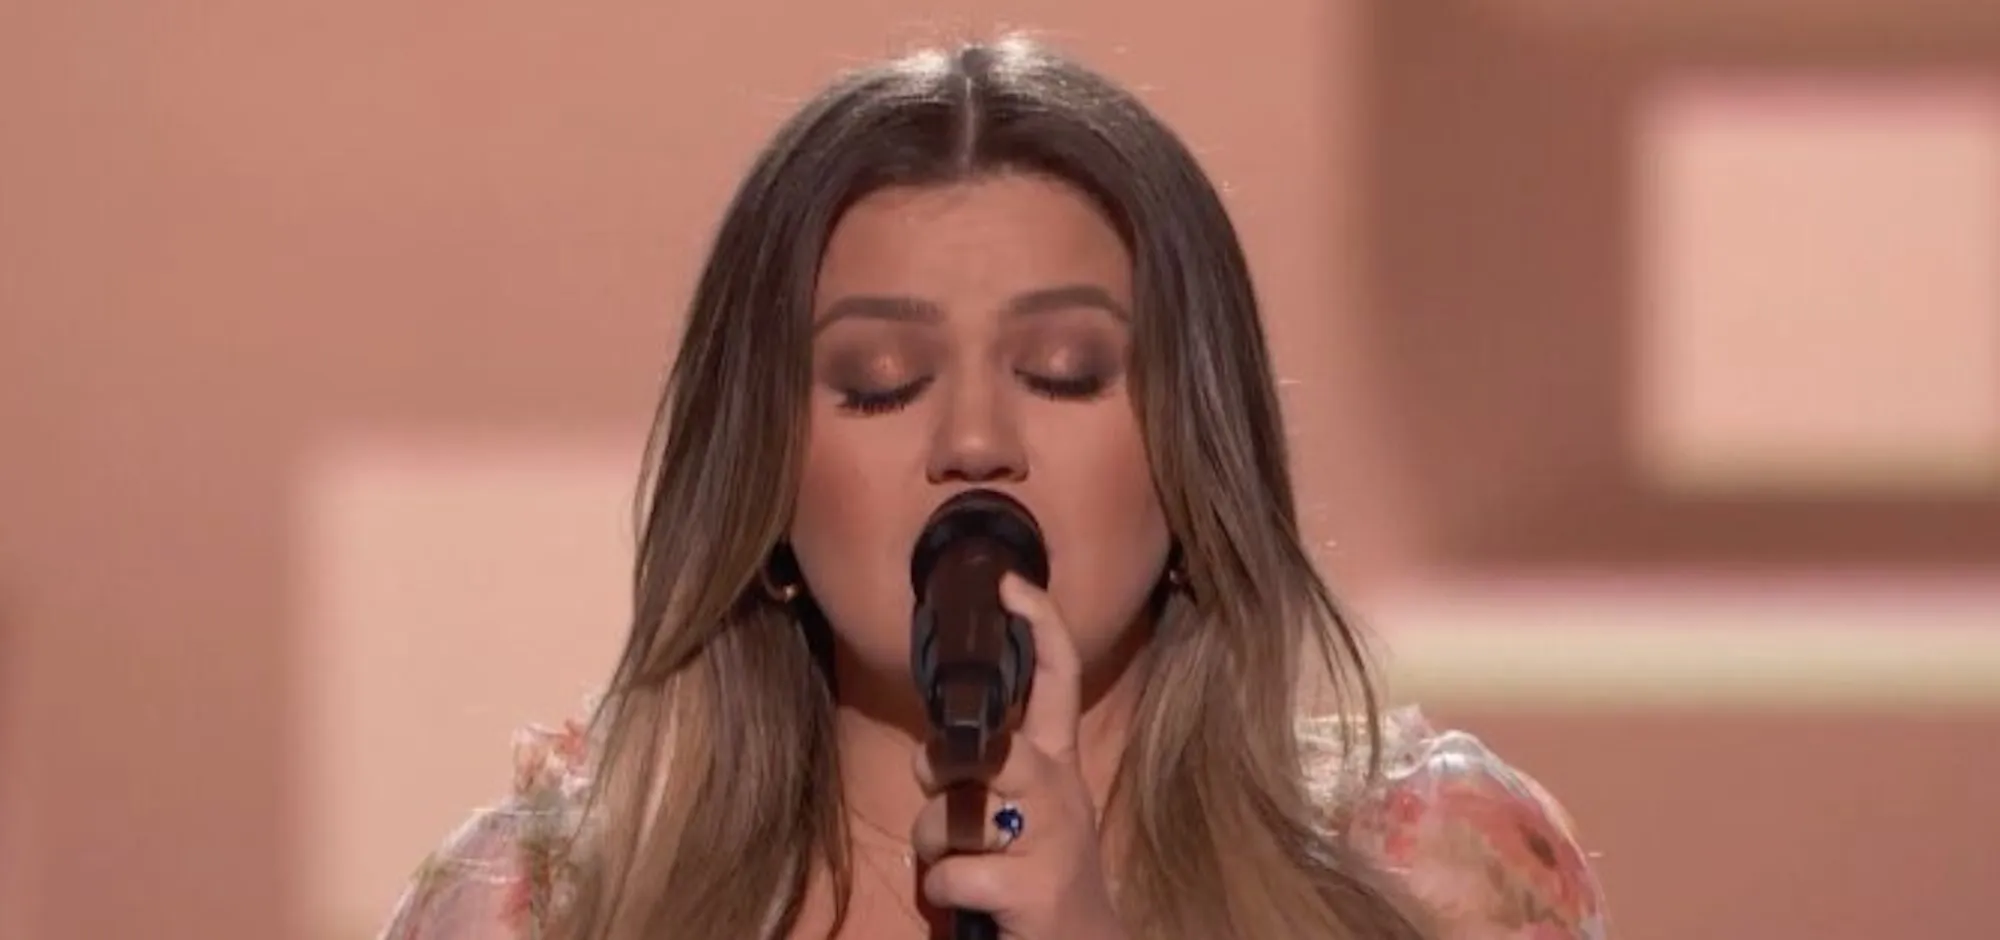 Kelly Clarkson Performs Rod Stewart’s “Forever Young” and “She Used To Be ” from Broadway’s ‘Waitress’ in Latest Kellyoke